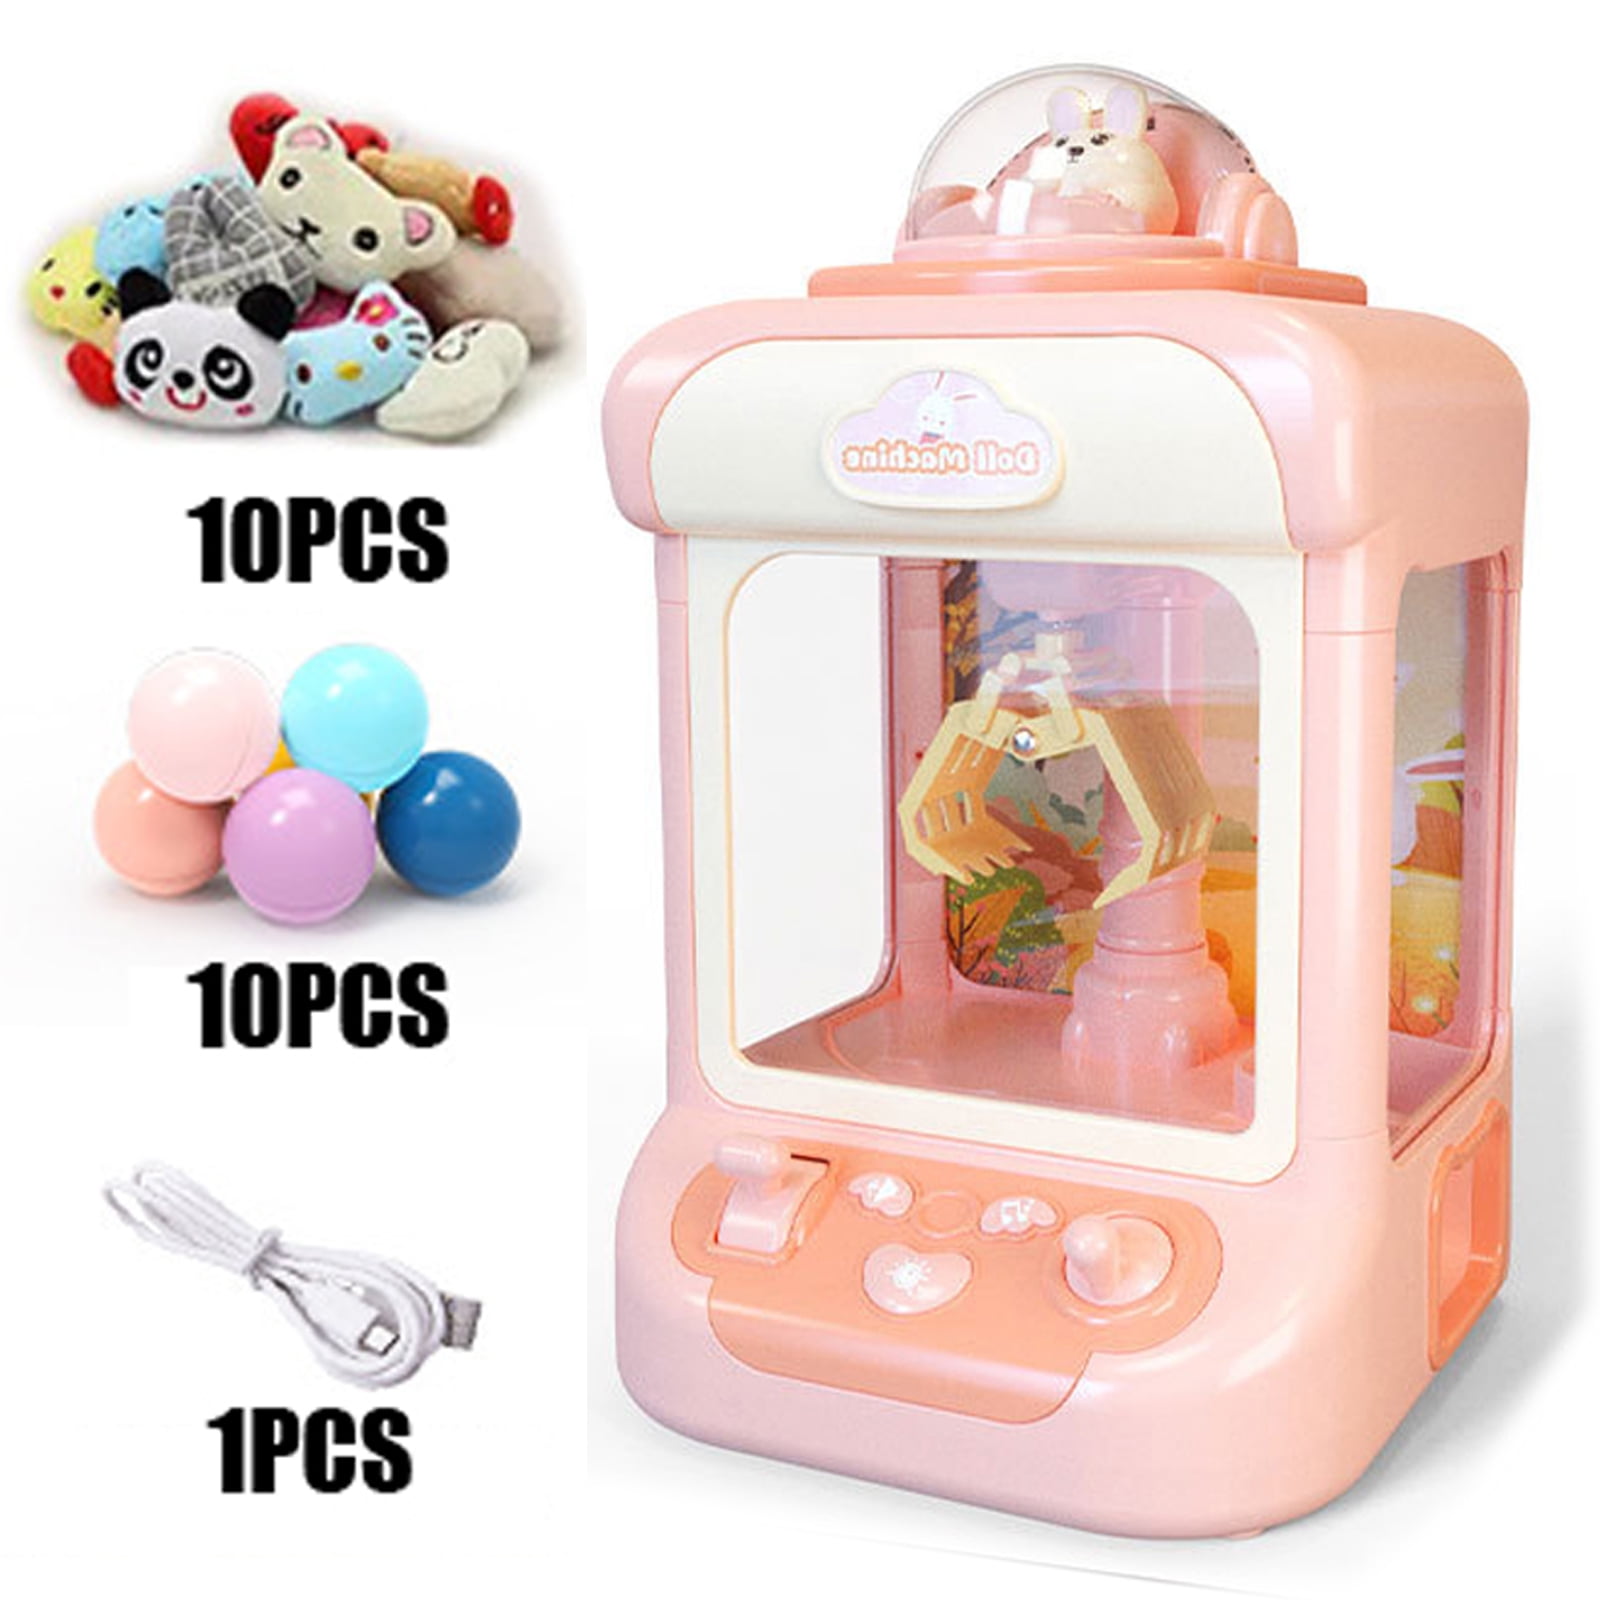 Candy Mini Claw Machine for Kids, Bear Toys for Girls 8-10